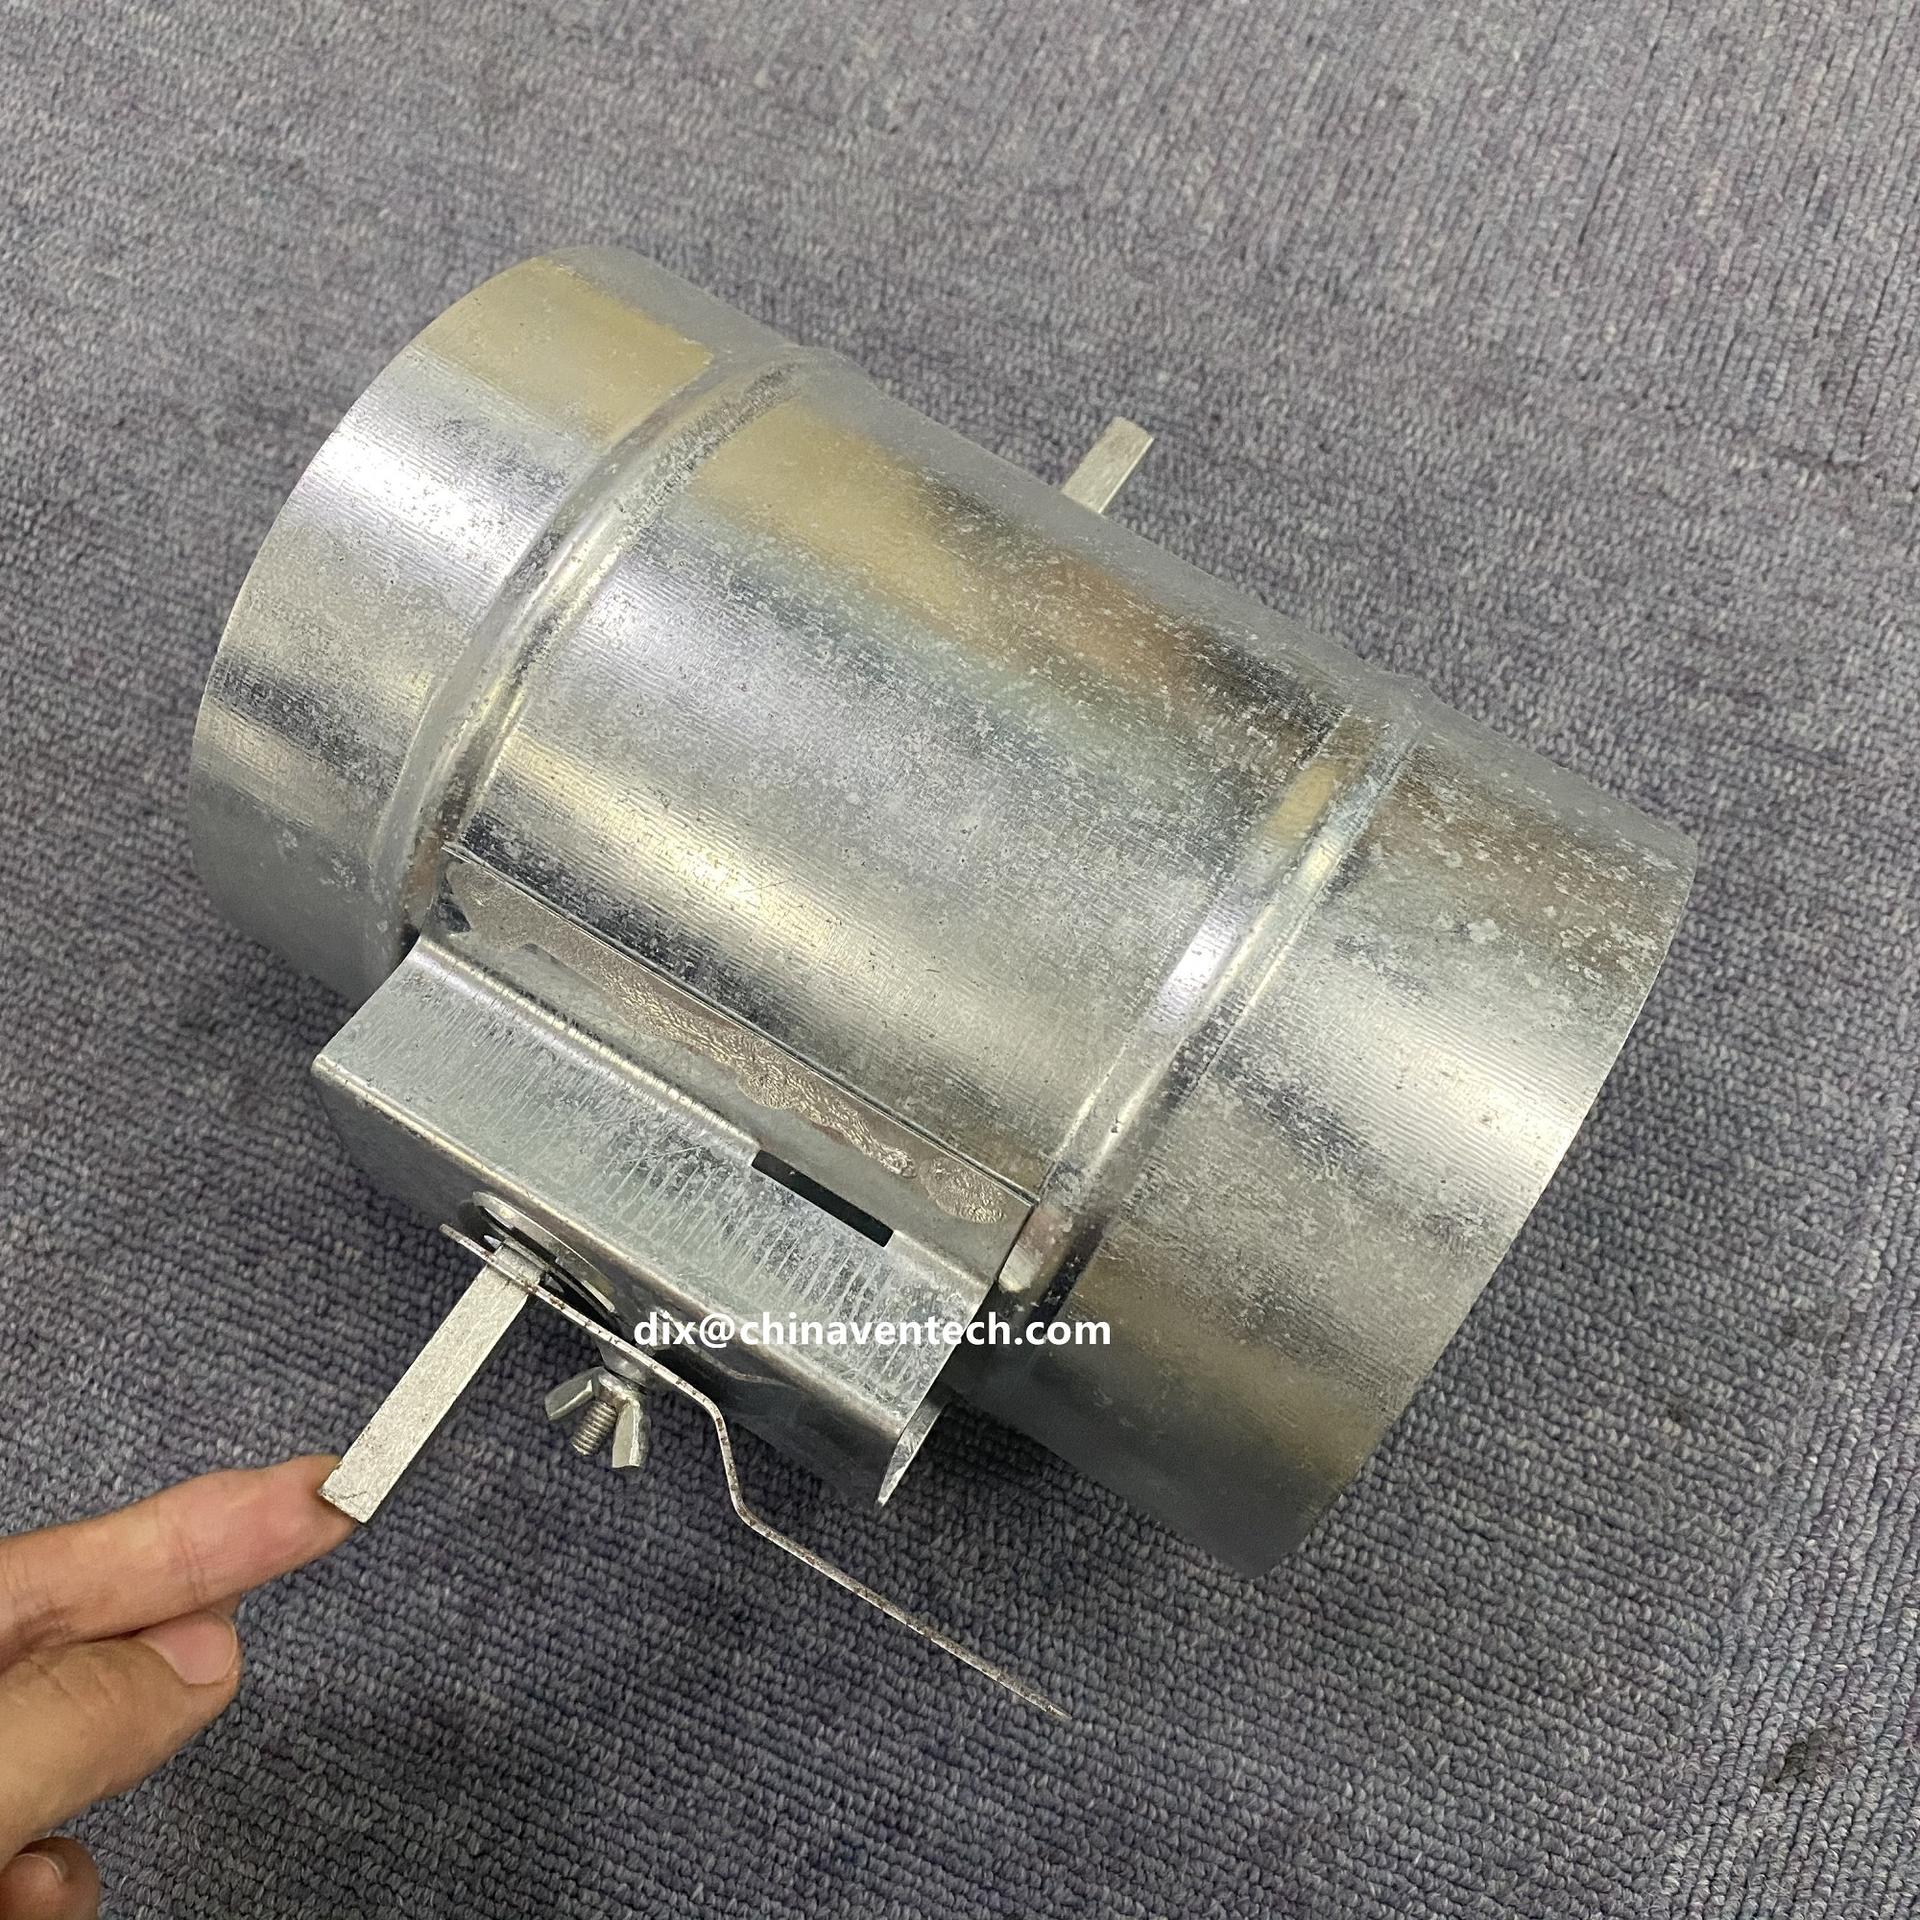 HVAC Systems Manual Round Air Damper Air Duct Mounting Volume Control Damper